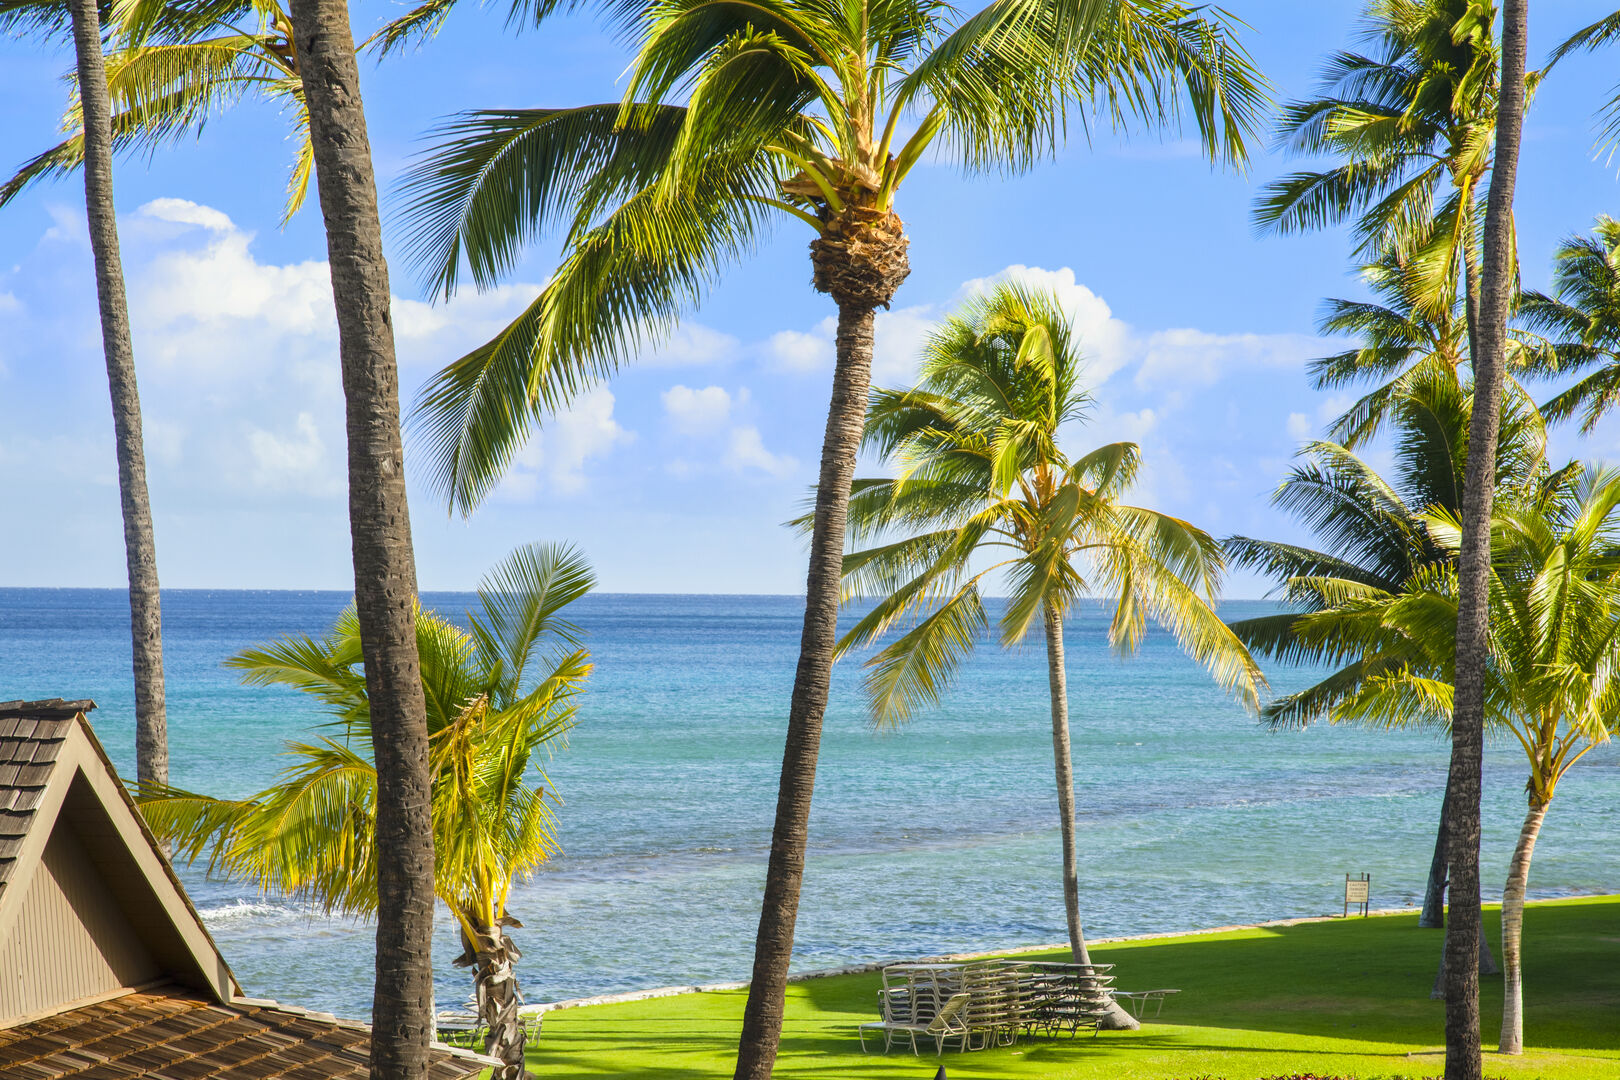 Refreshing view of the ocean from your lanai!